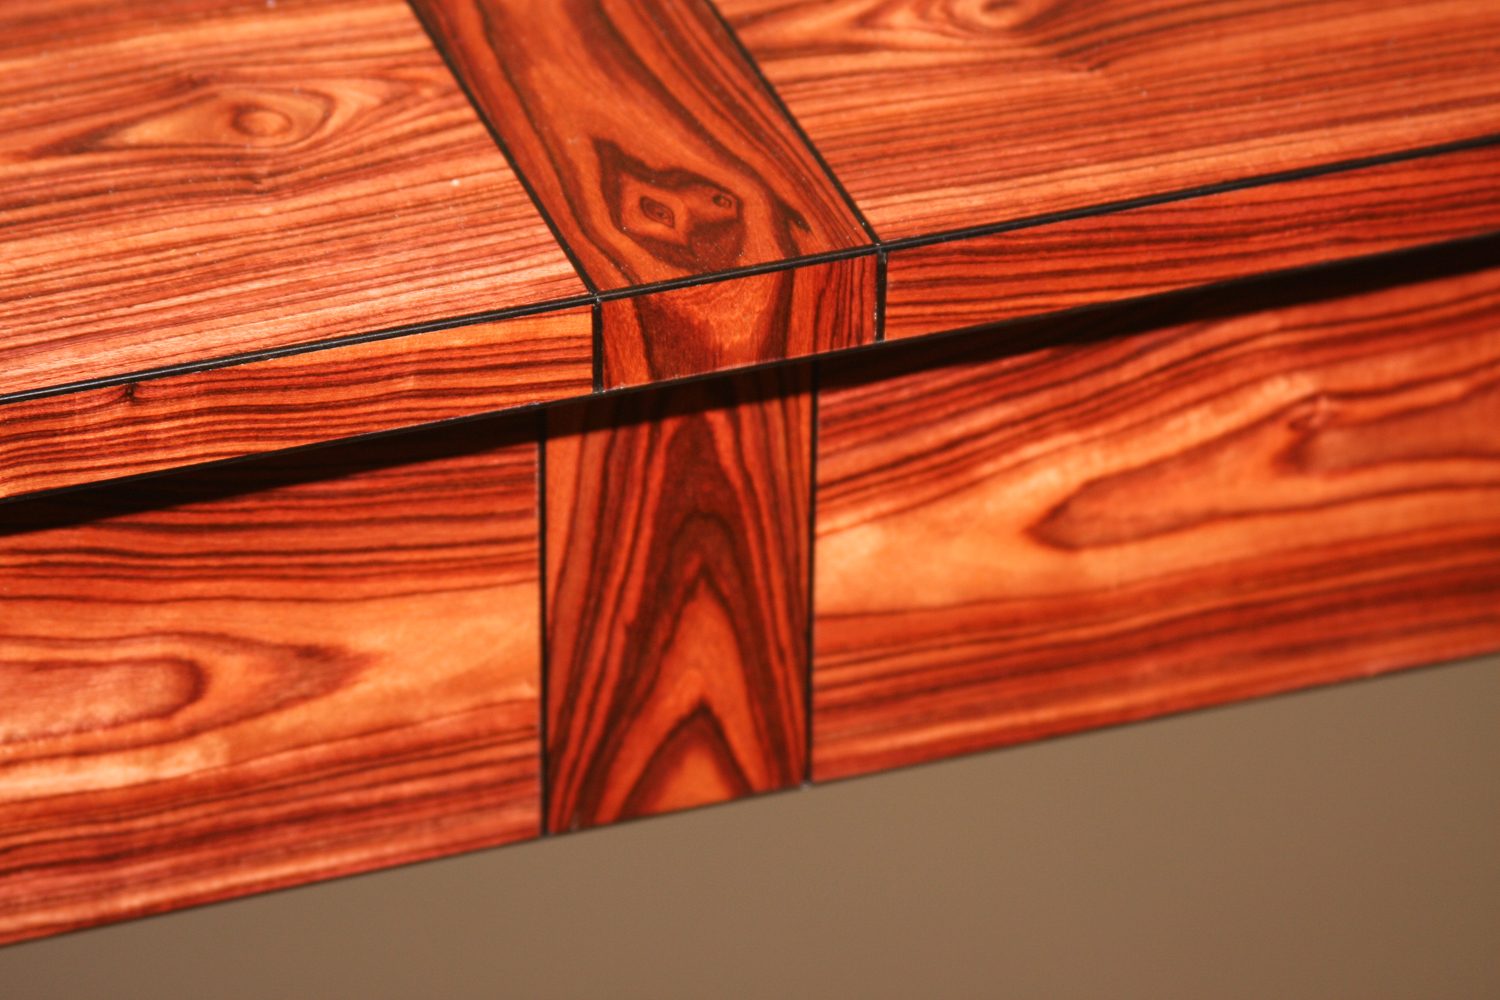 Ebony Inlay Detail Follows Across Top and Down Across Drawer Front